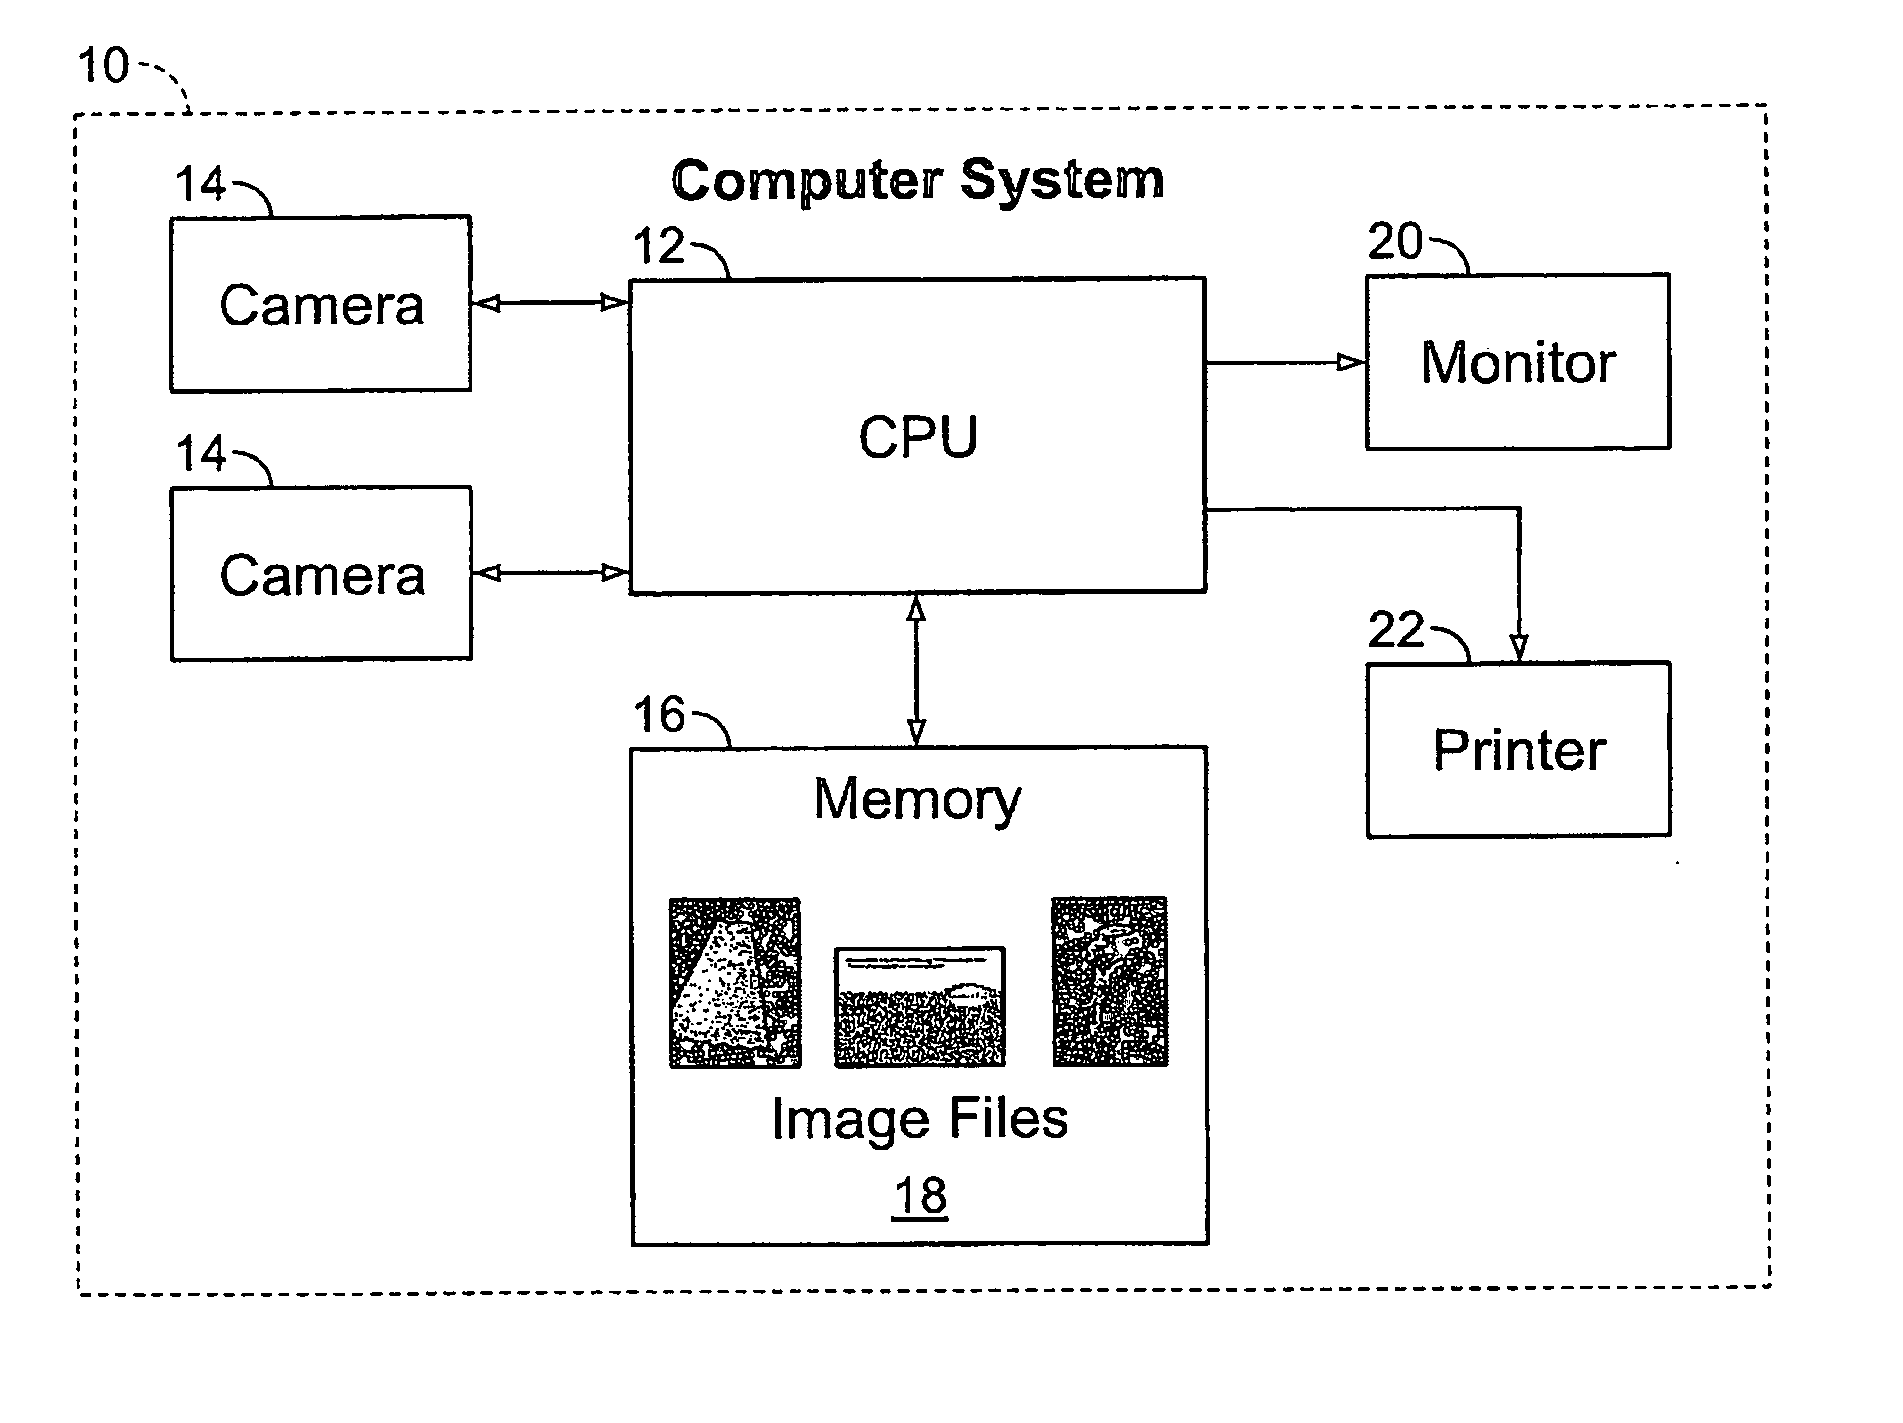 Method and system for learning object recognition in images